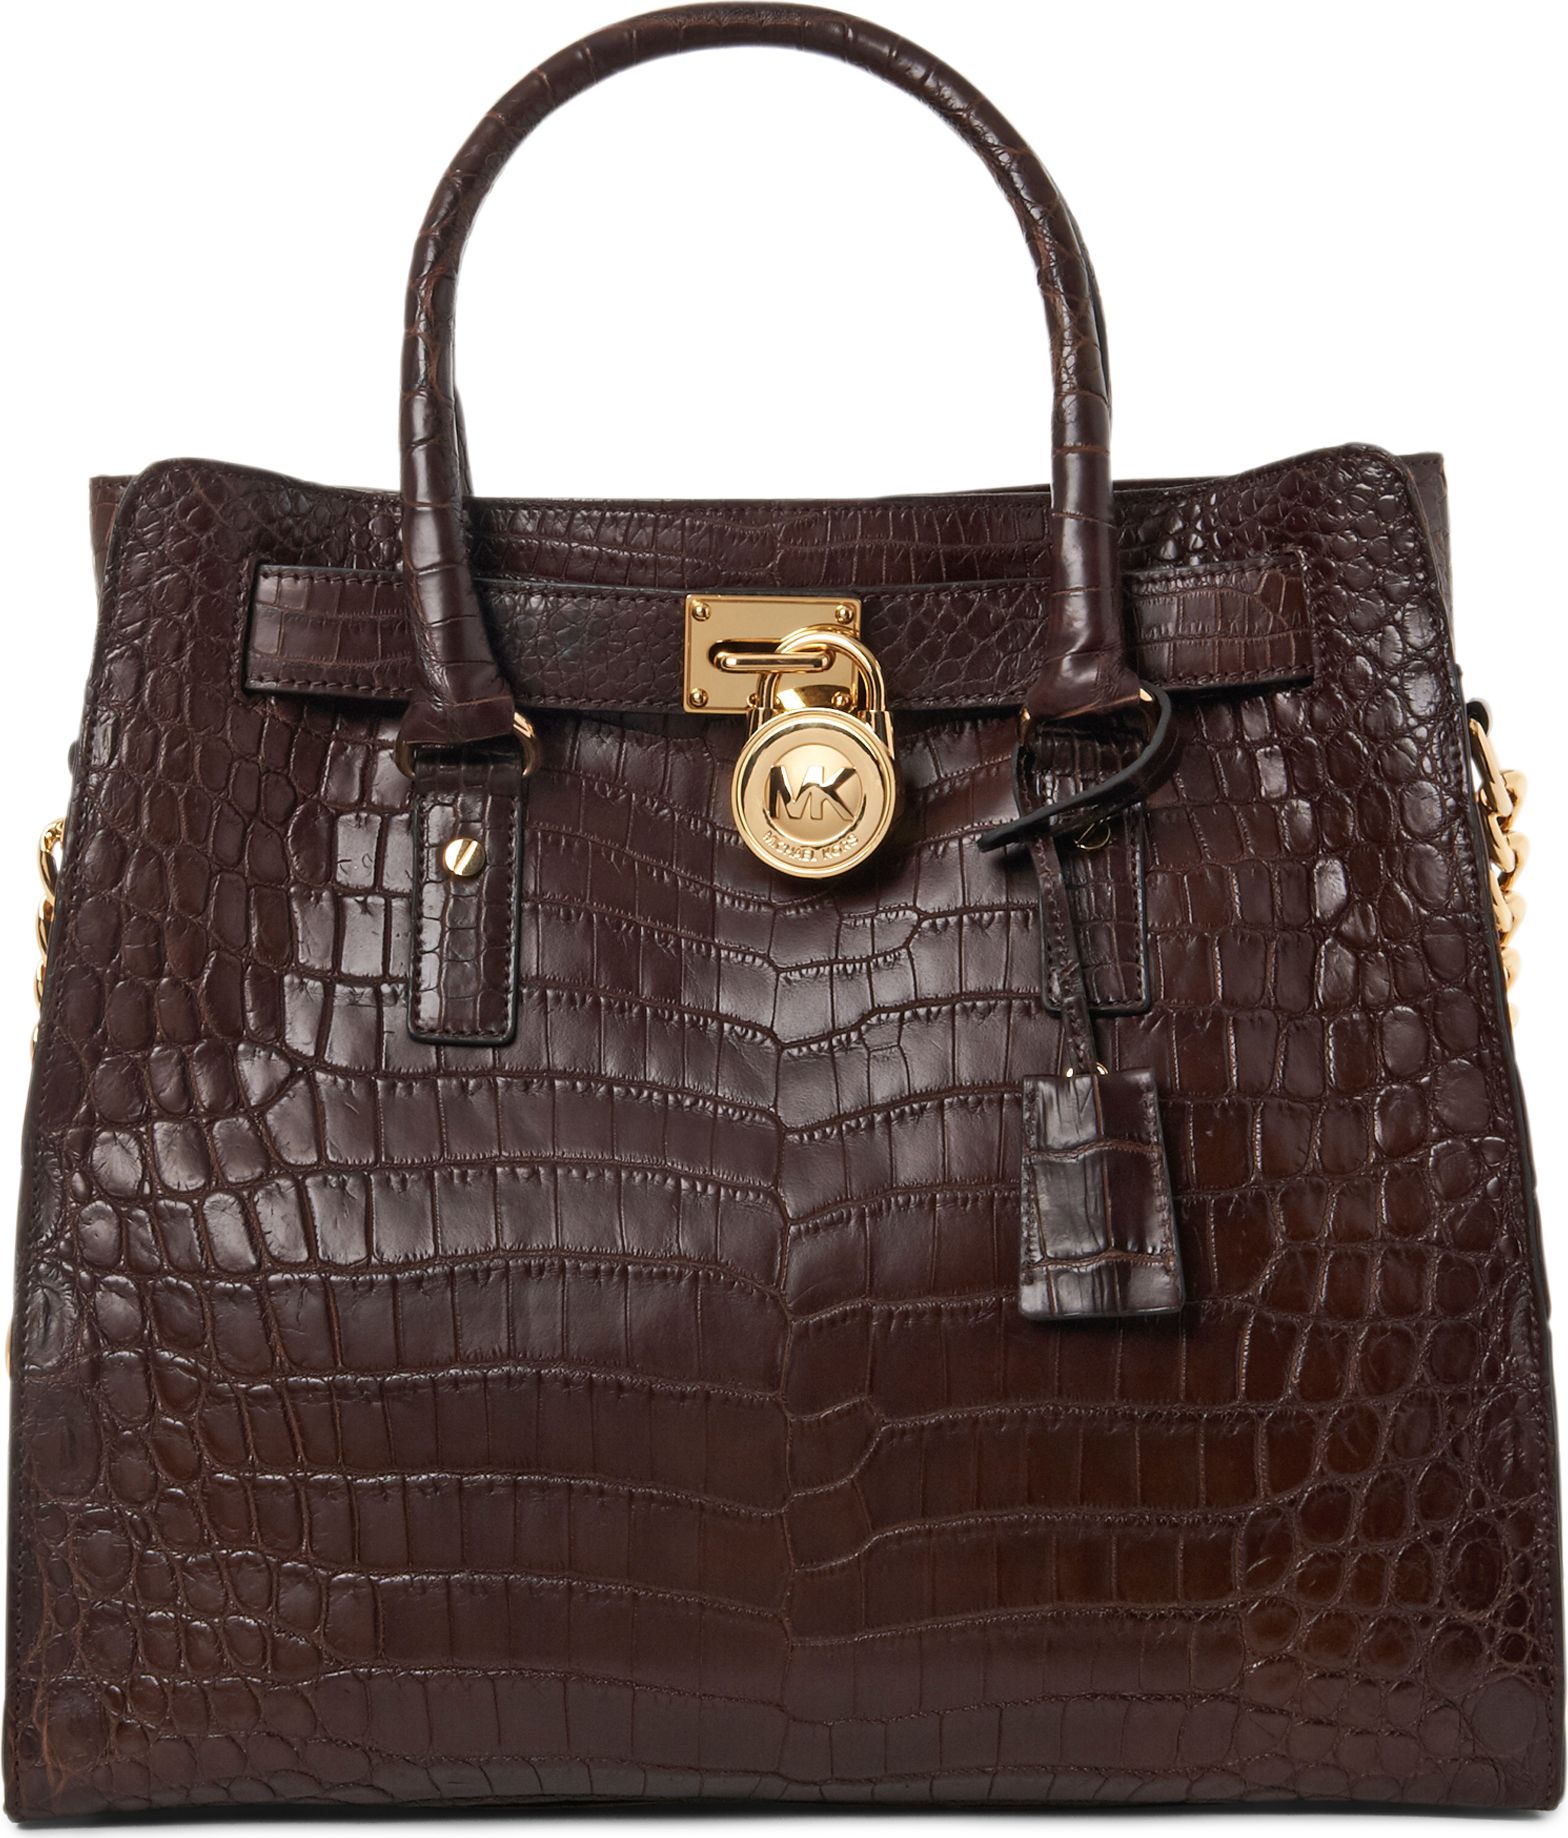 Michael Kors Hamilton Croc Leather Tote in Brown (chocolate) | Lyst